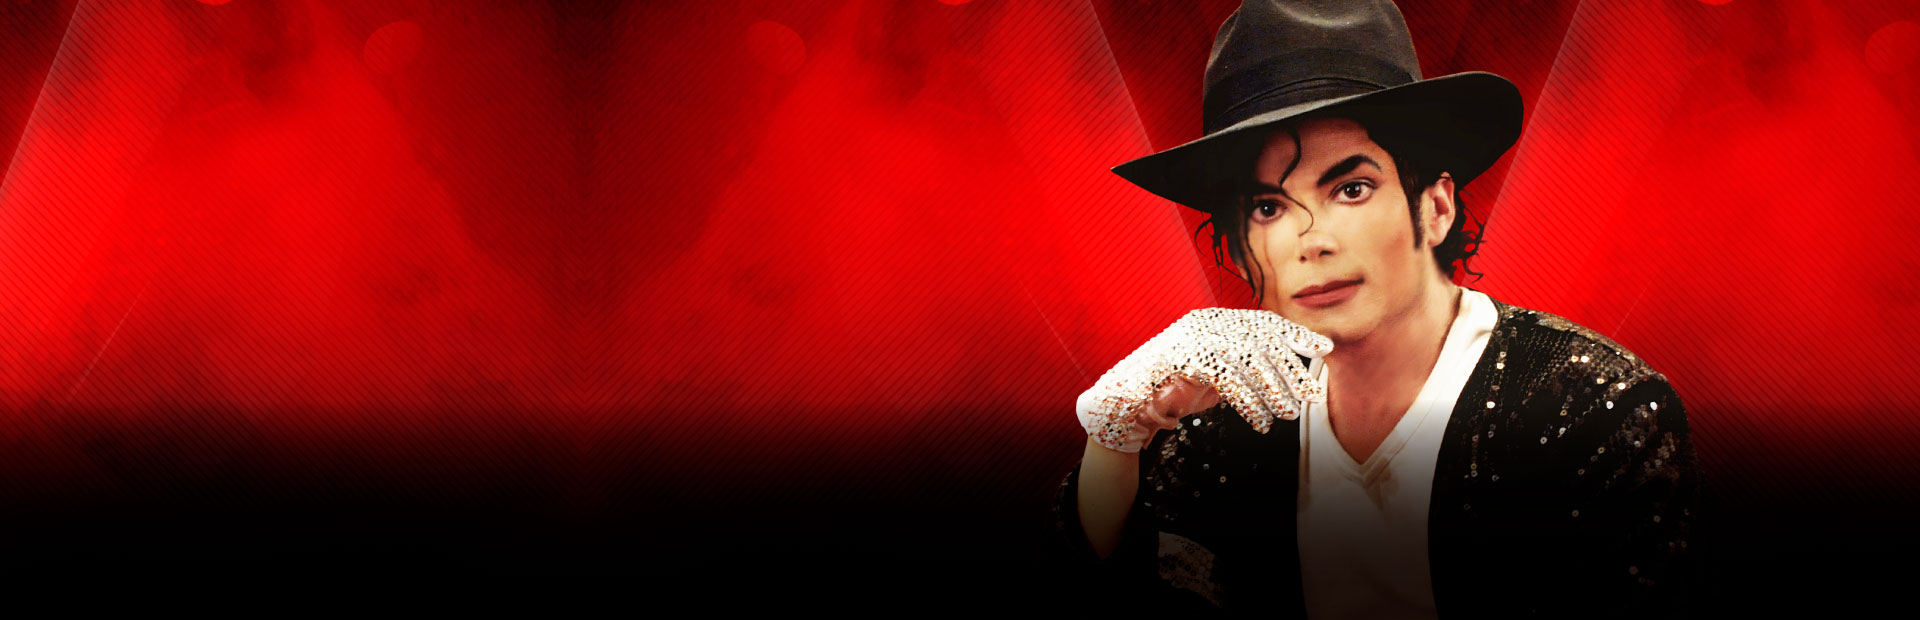 The Legend King of Pop- Tributo a Michael Jackson